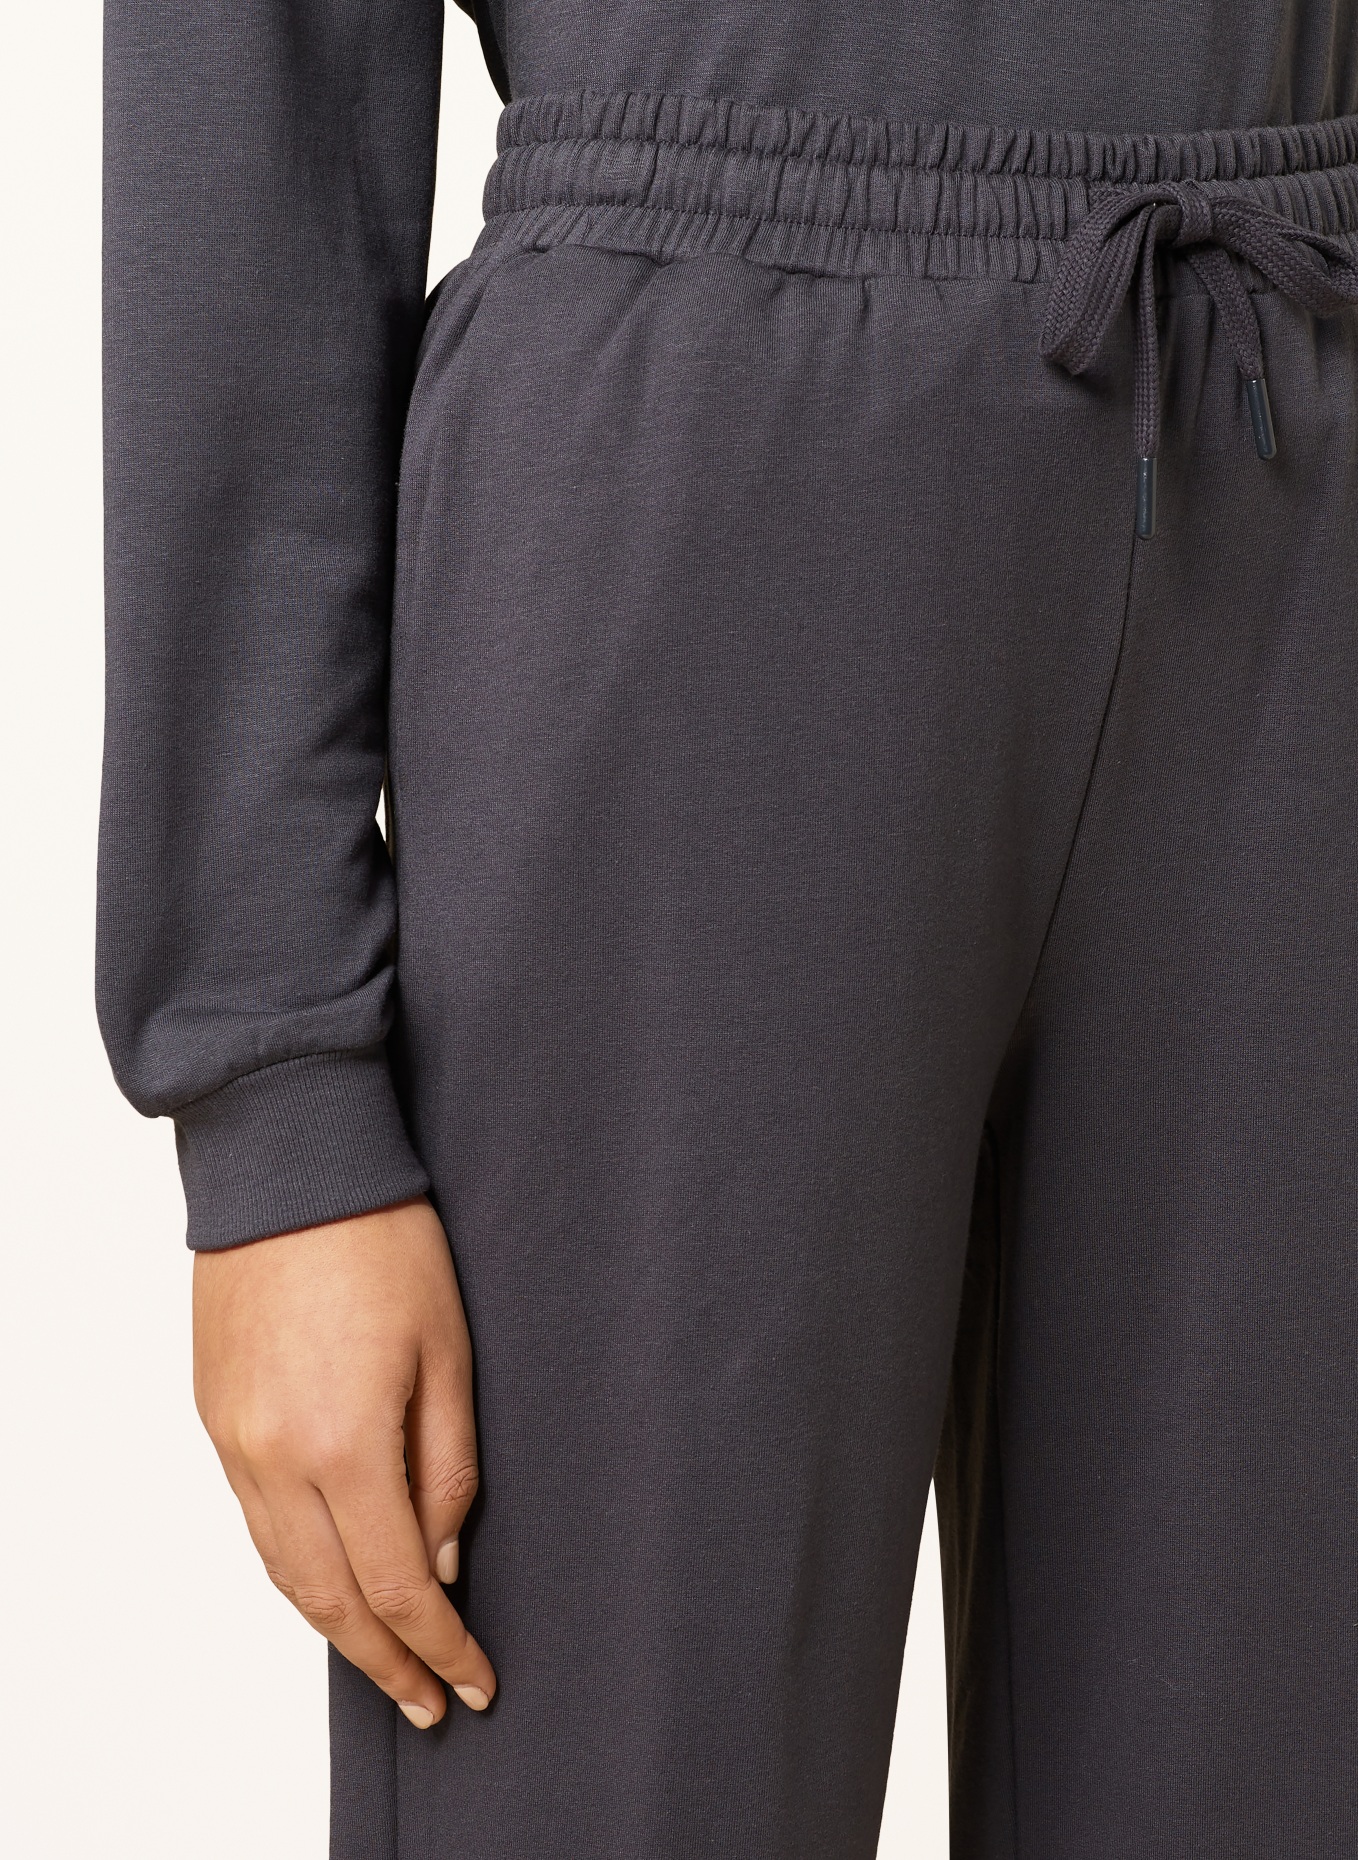 mey Lounge pants series ROSE, Color: GRAY (Image 5)